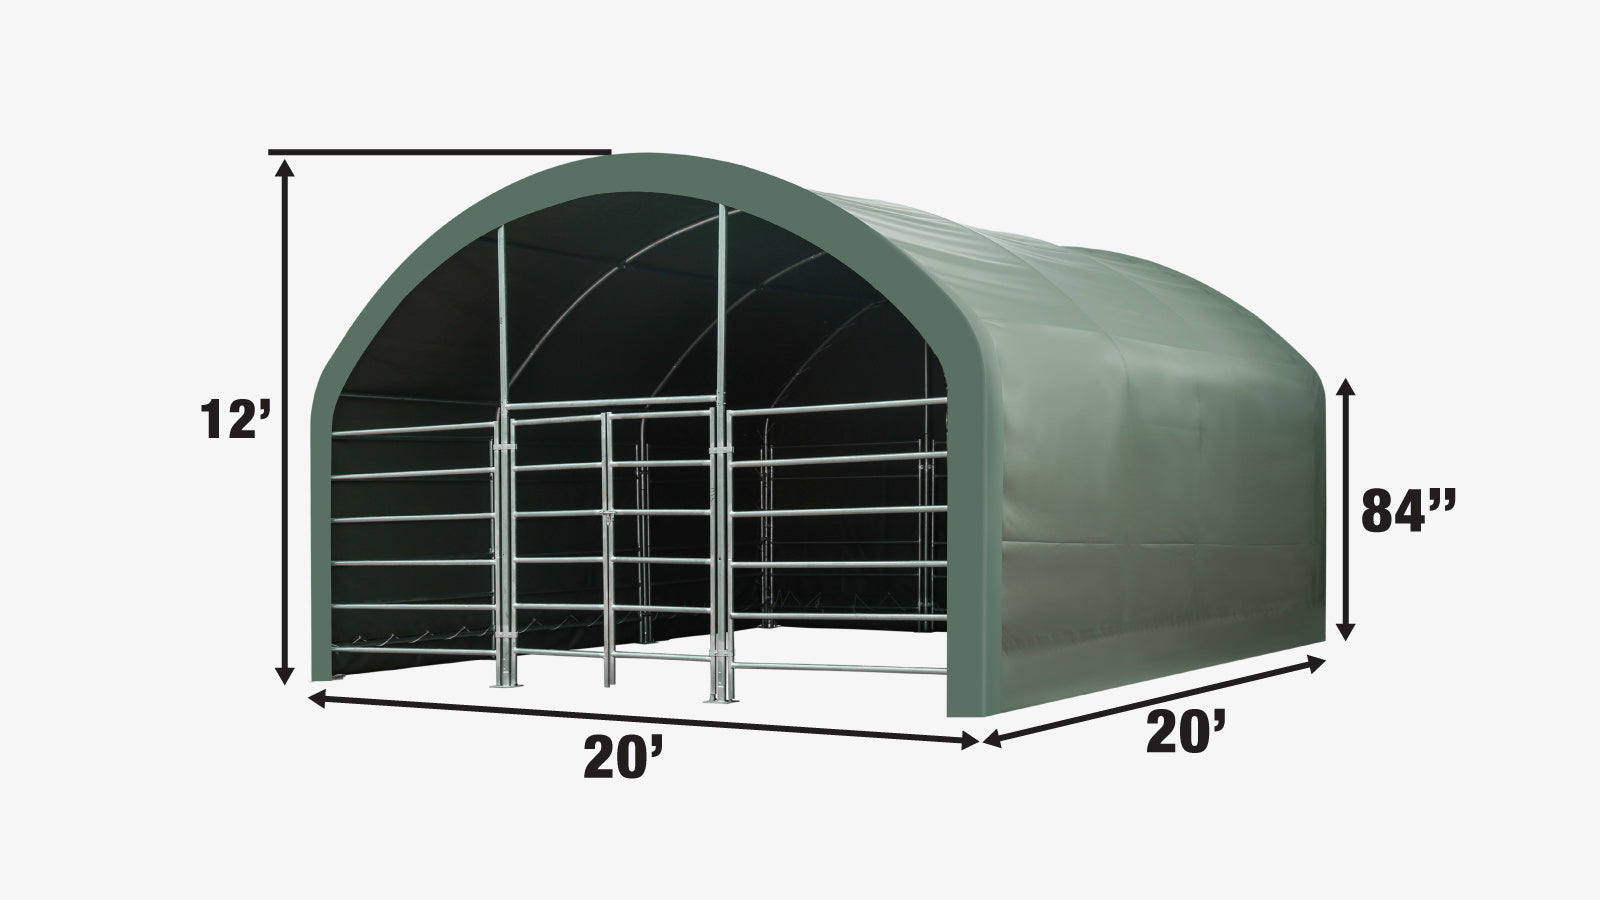 TMG Industrial 20’ x 20’ Livestock Corral Shelter, Powder Coated Structure, 12’ Dome Roof, 17 oz Military Green PVC Fabric Covering, 6-Bar Corral Panels, 5’ Front Swing Gate, TMG-ST2020L-specifications-image